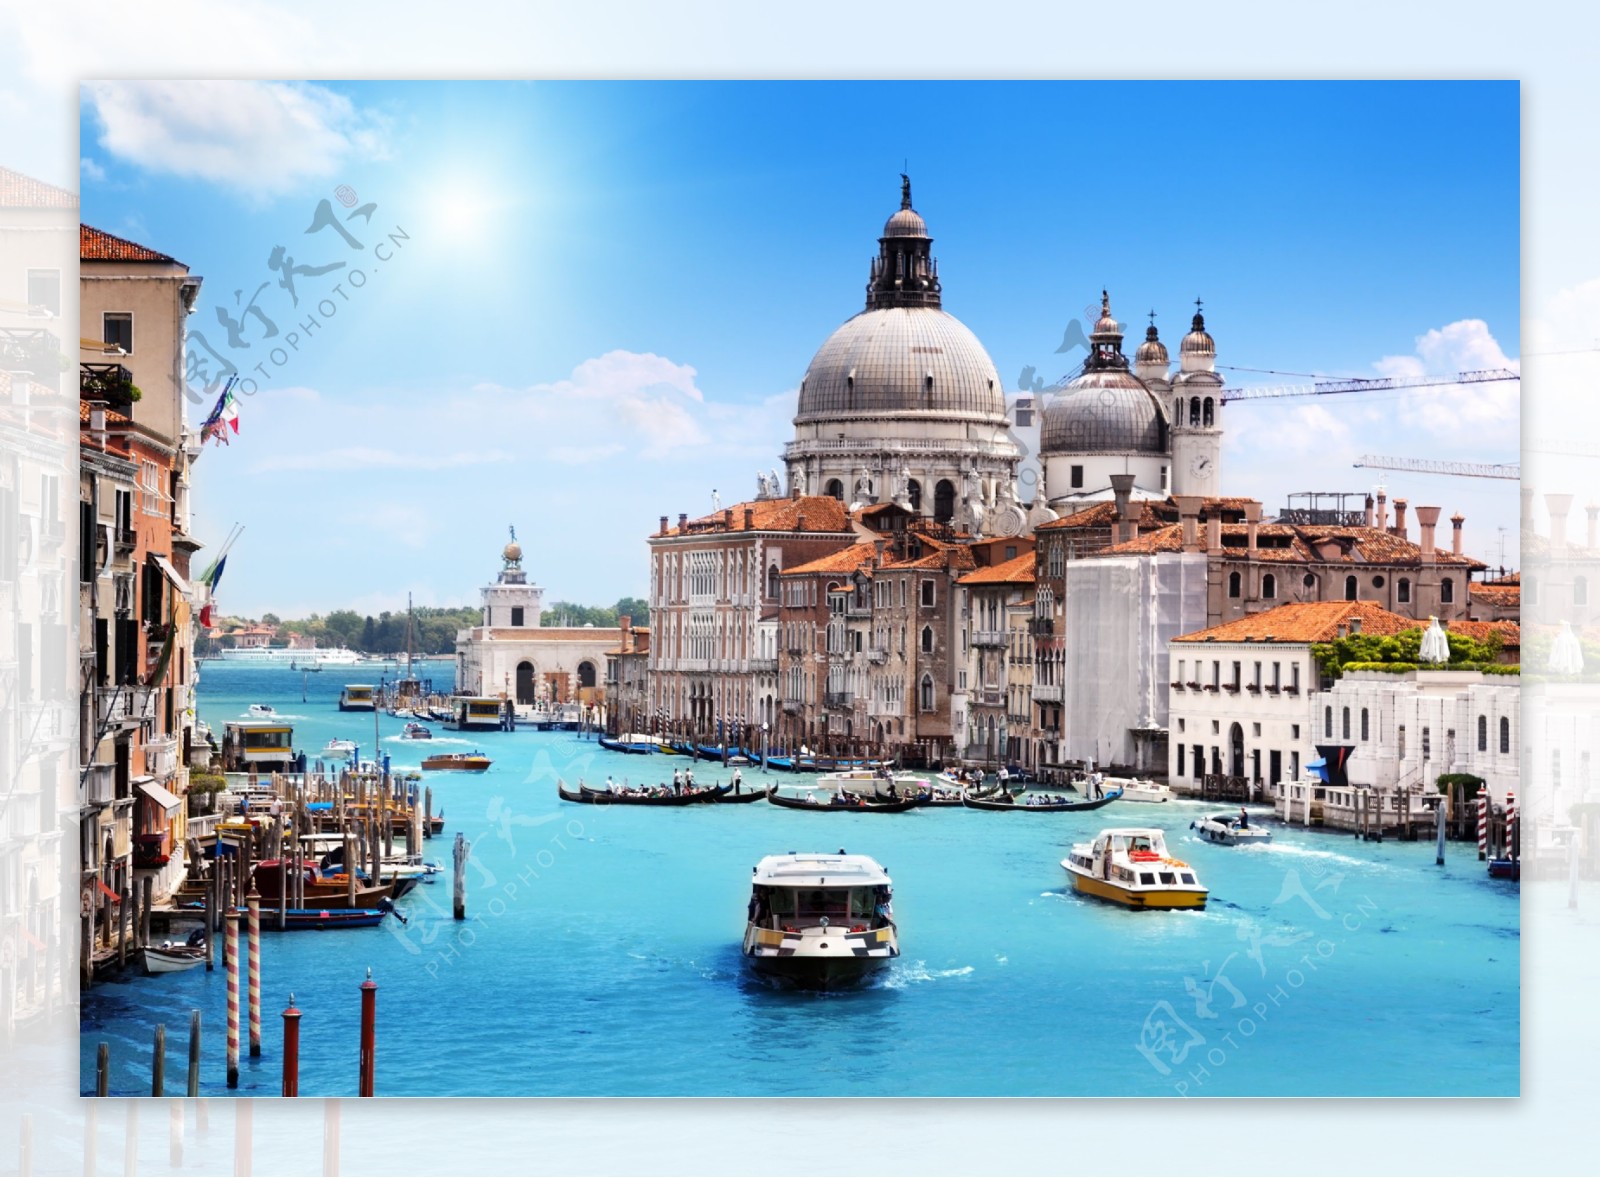 Free Images : venice, italy, architecture, canal, europe, city, travel, bridge, river, building ...